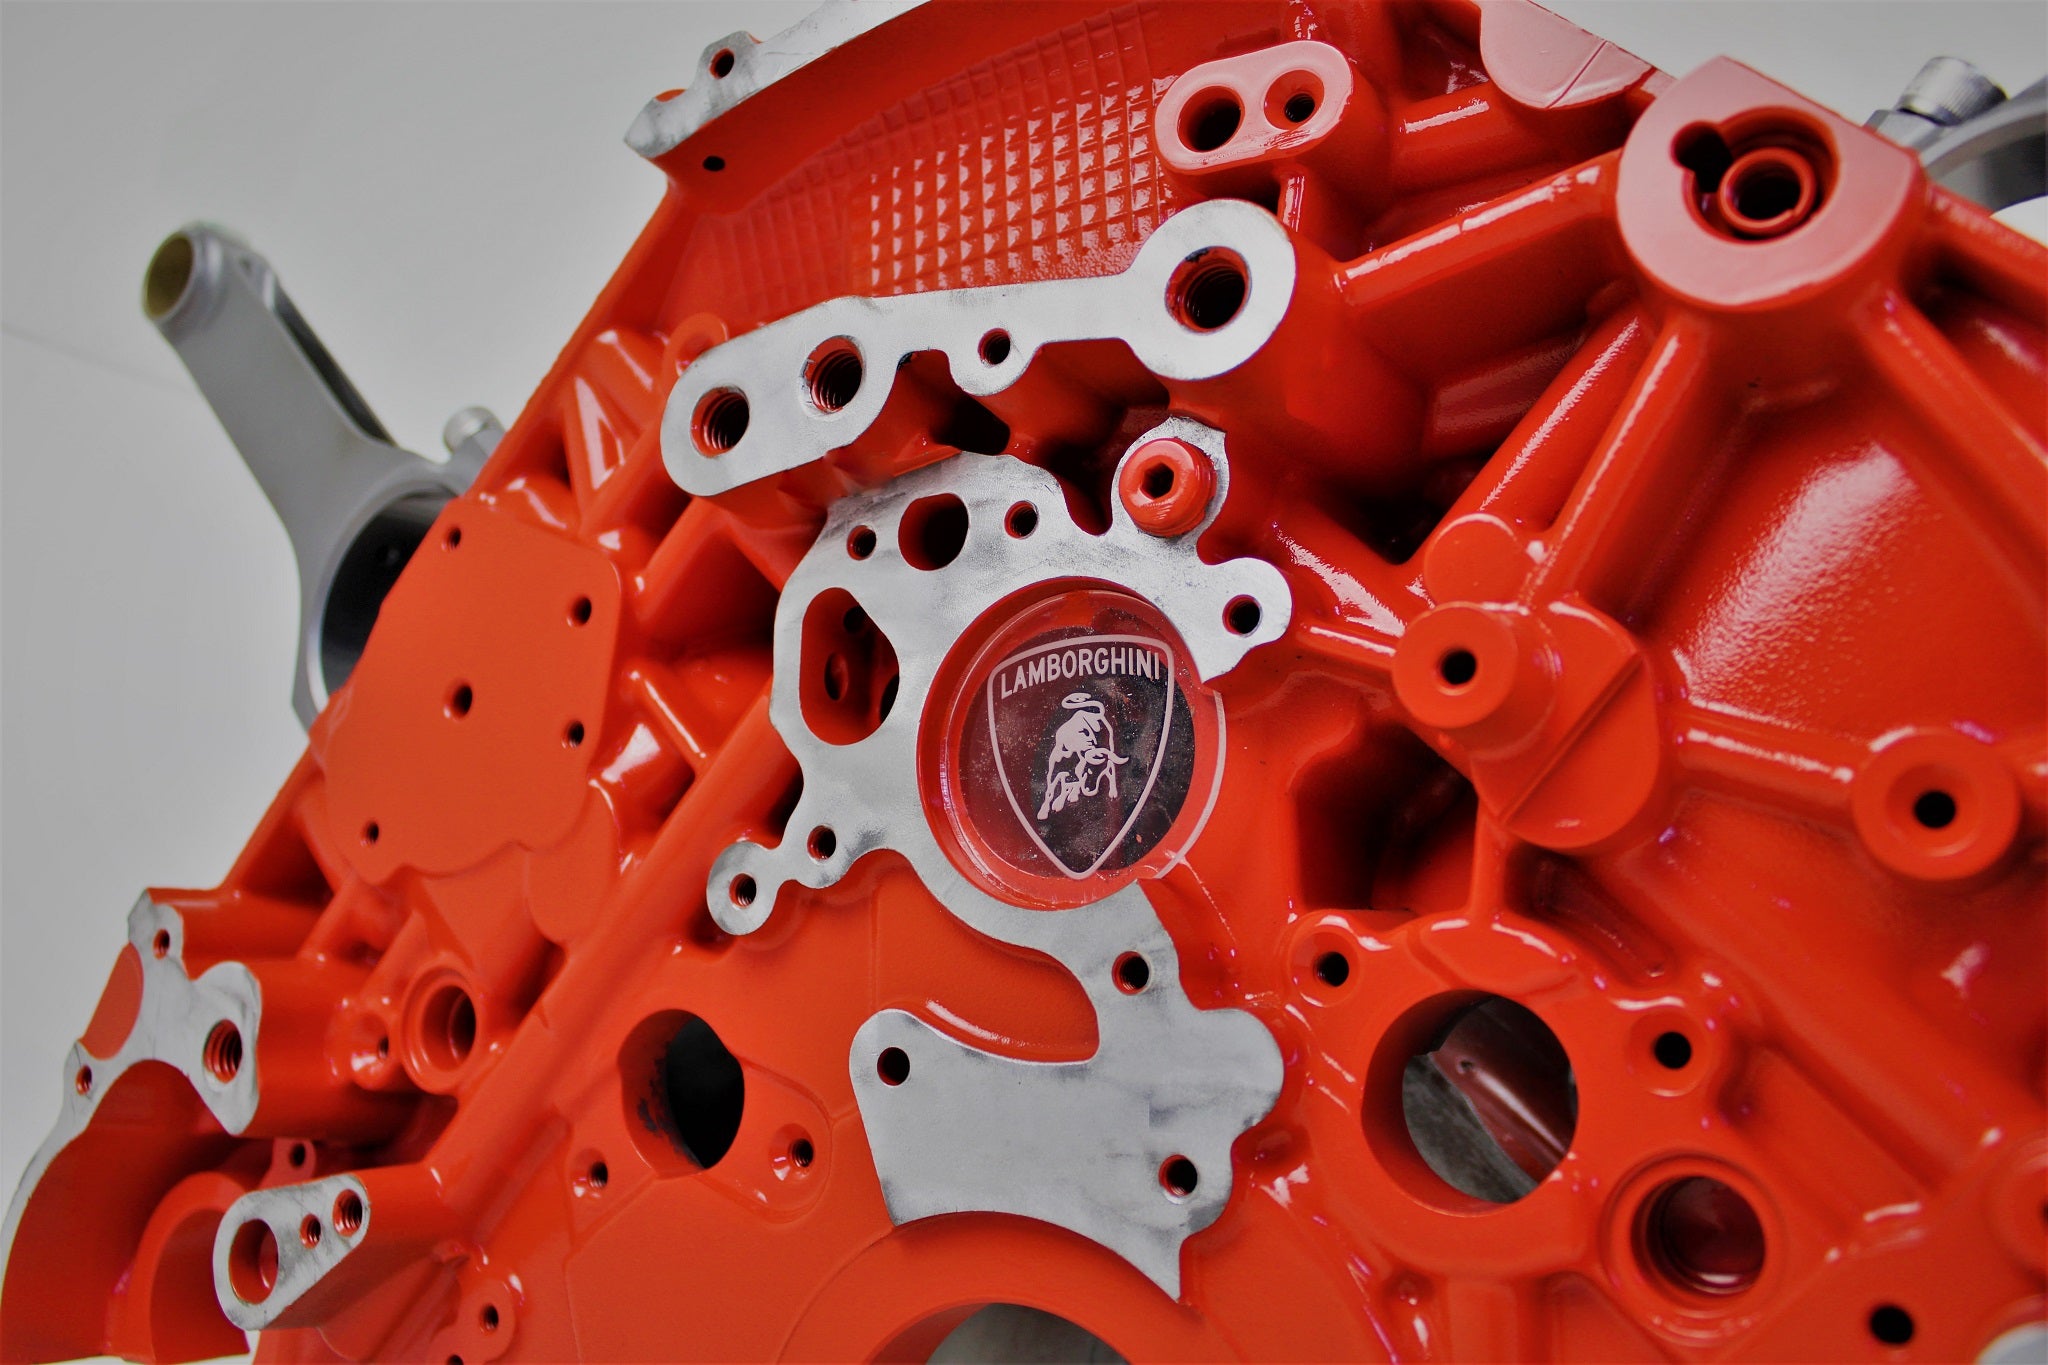 Close-up view of a Lamborghini Gallardo V10 engine block coffee table finished in orange with a square glass top.